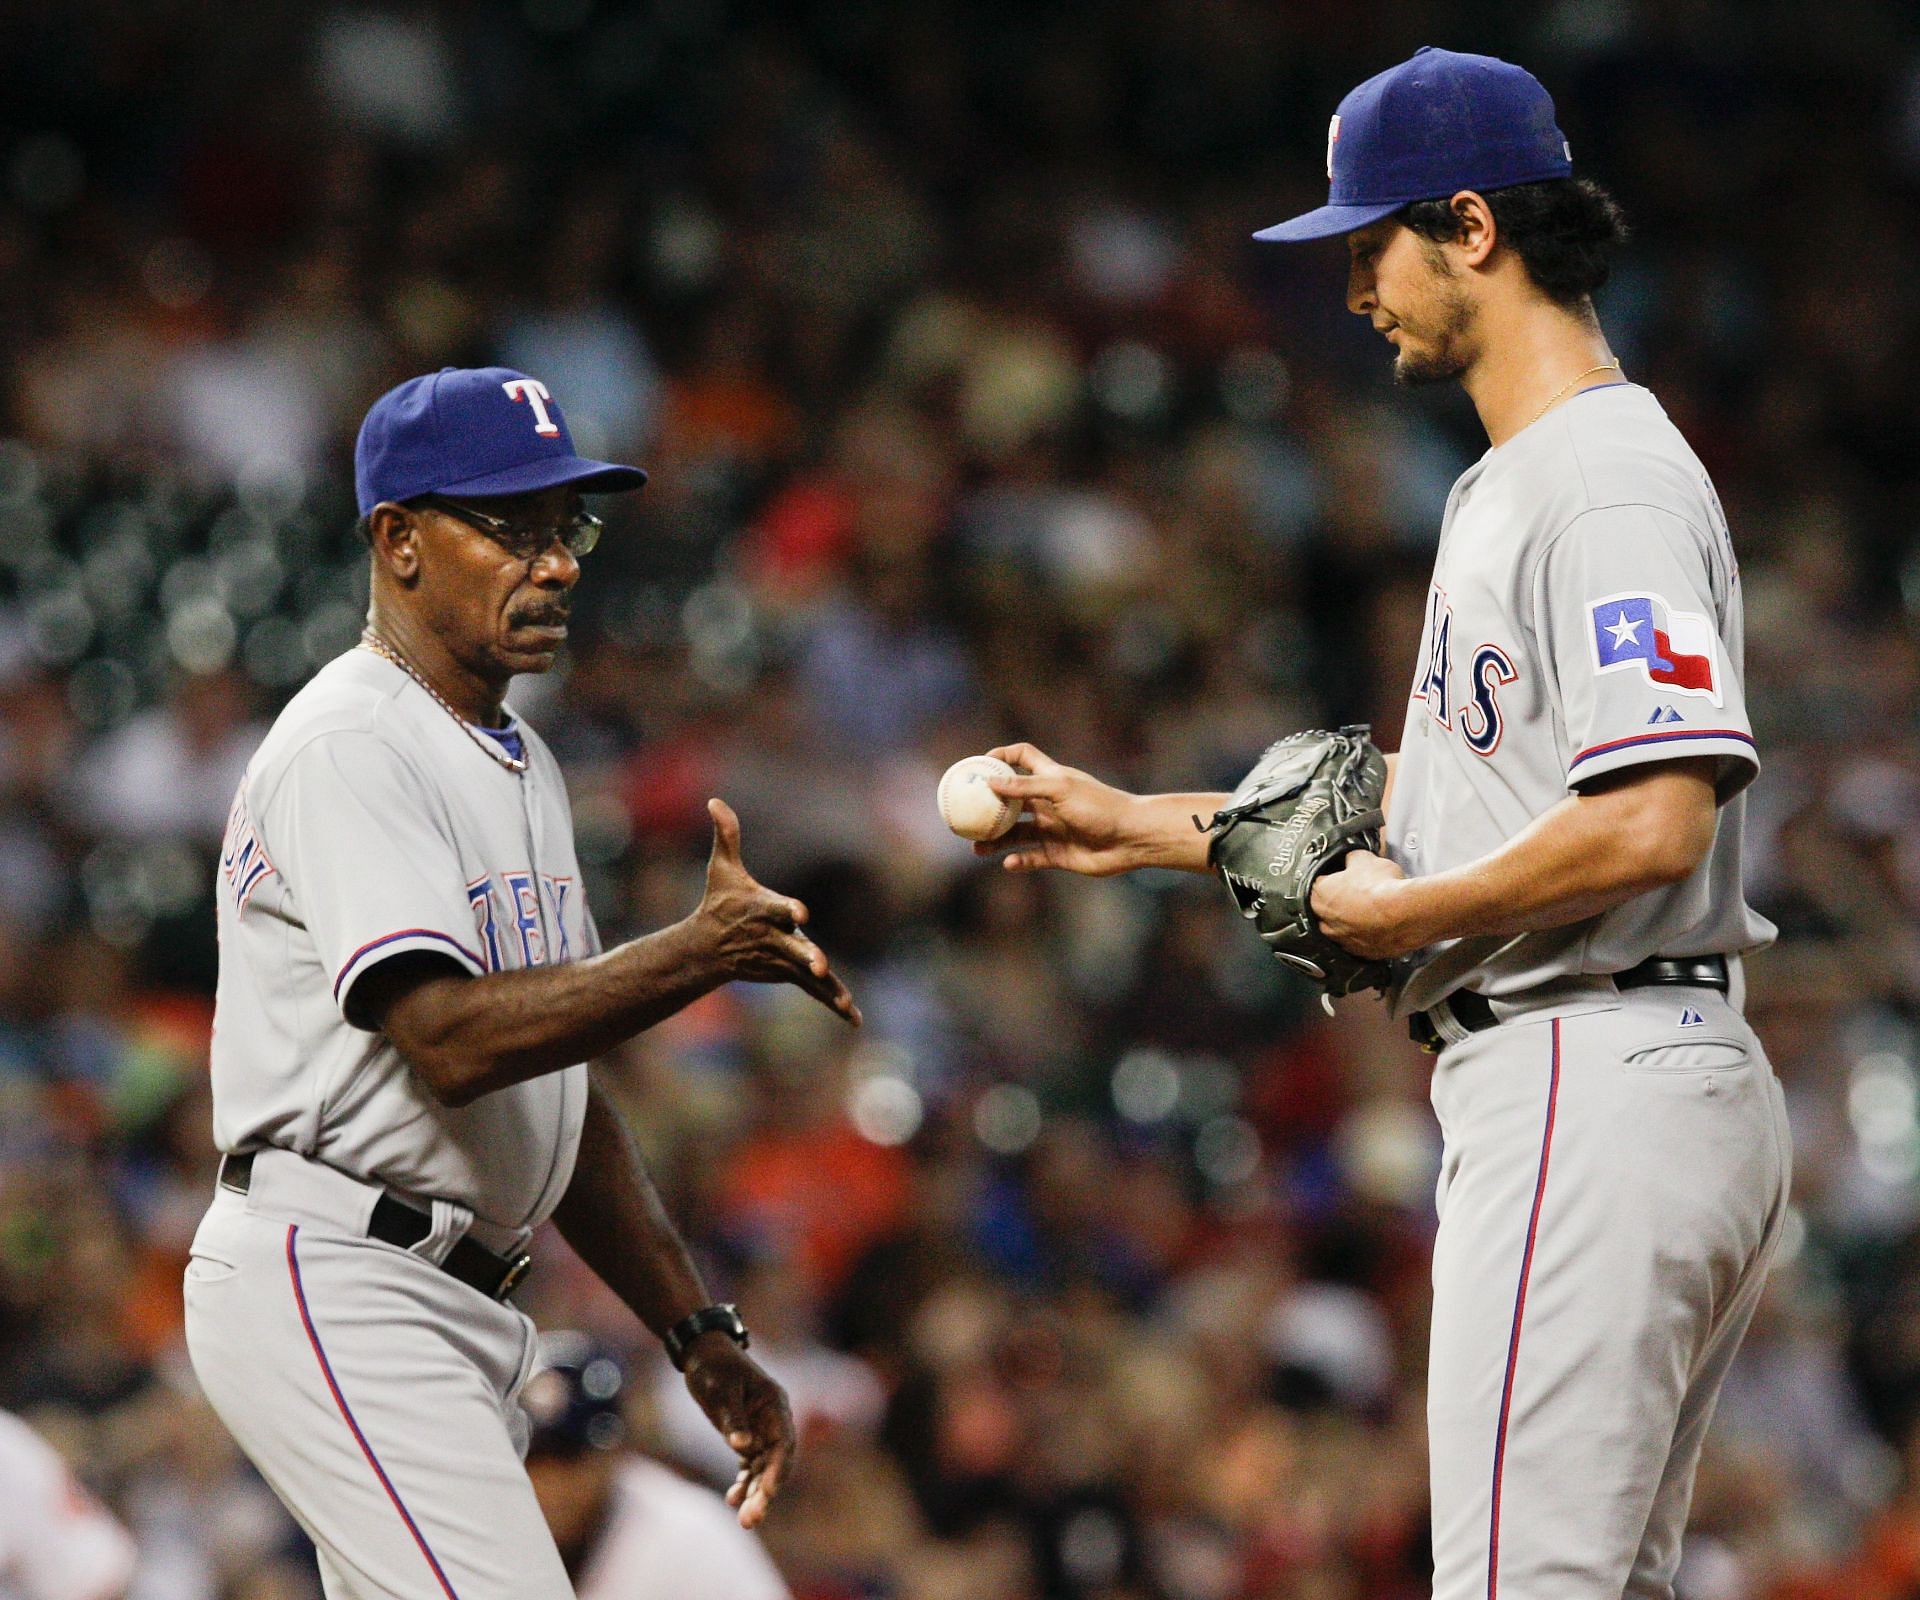 Texas Rangers v Houston Astros: HOUSTON, TX - AUGUST 09: Yu Darvish (11) of the Texas Rangers gives the ball to manager Ron Washington (38) as he leaves the game in the fifth inning against the Houston Astros at Minute Maid Park on August 9, 2014, in Houston, Texas. (Photo by Bob Levey/Getty Images)